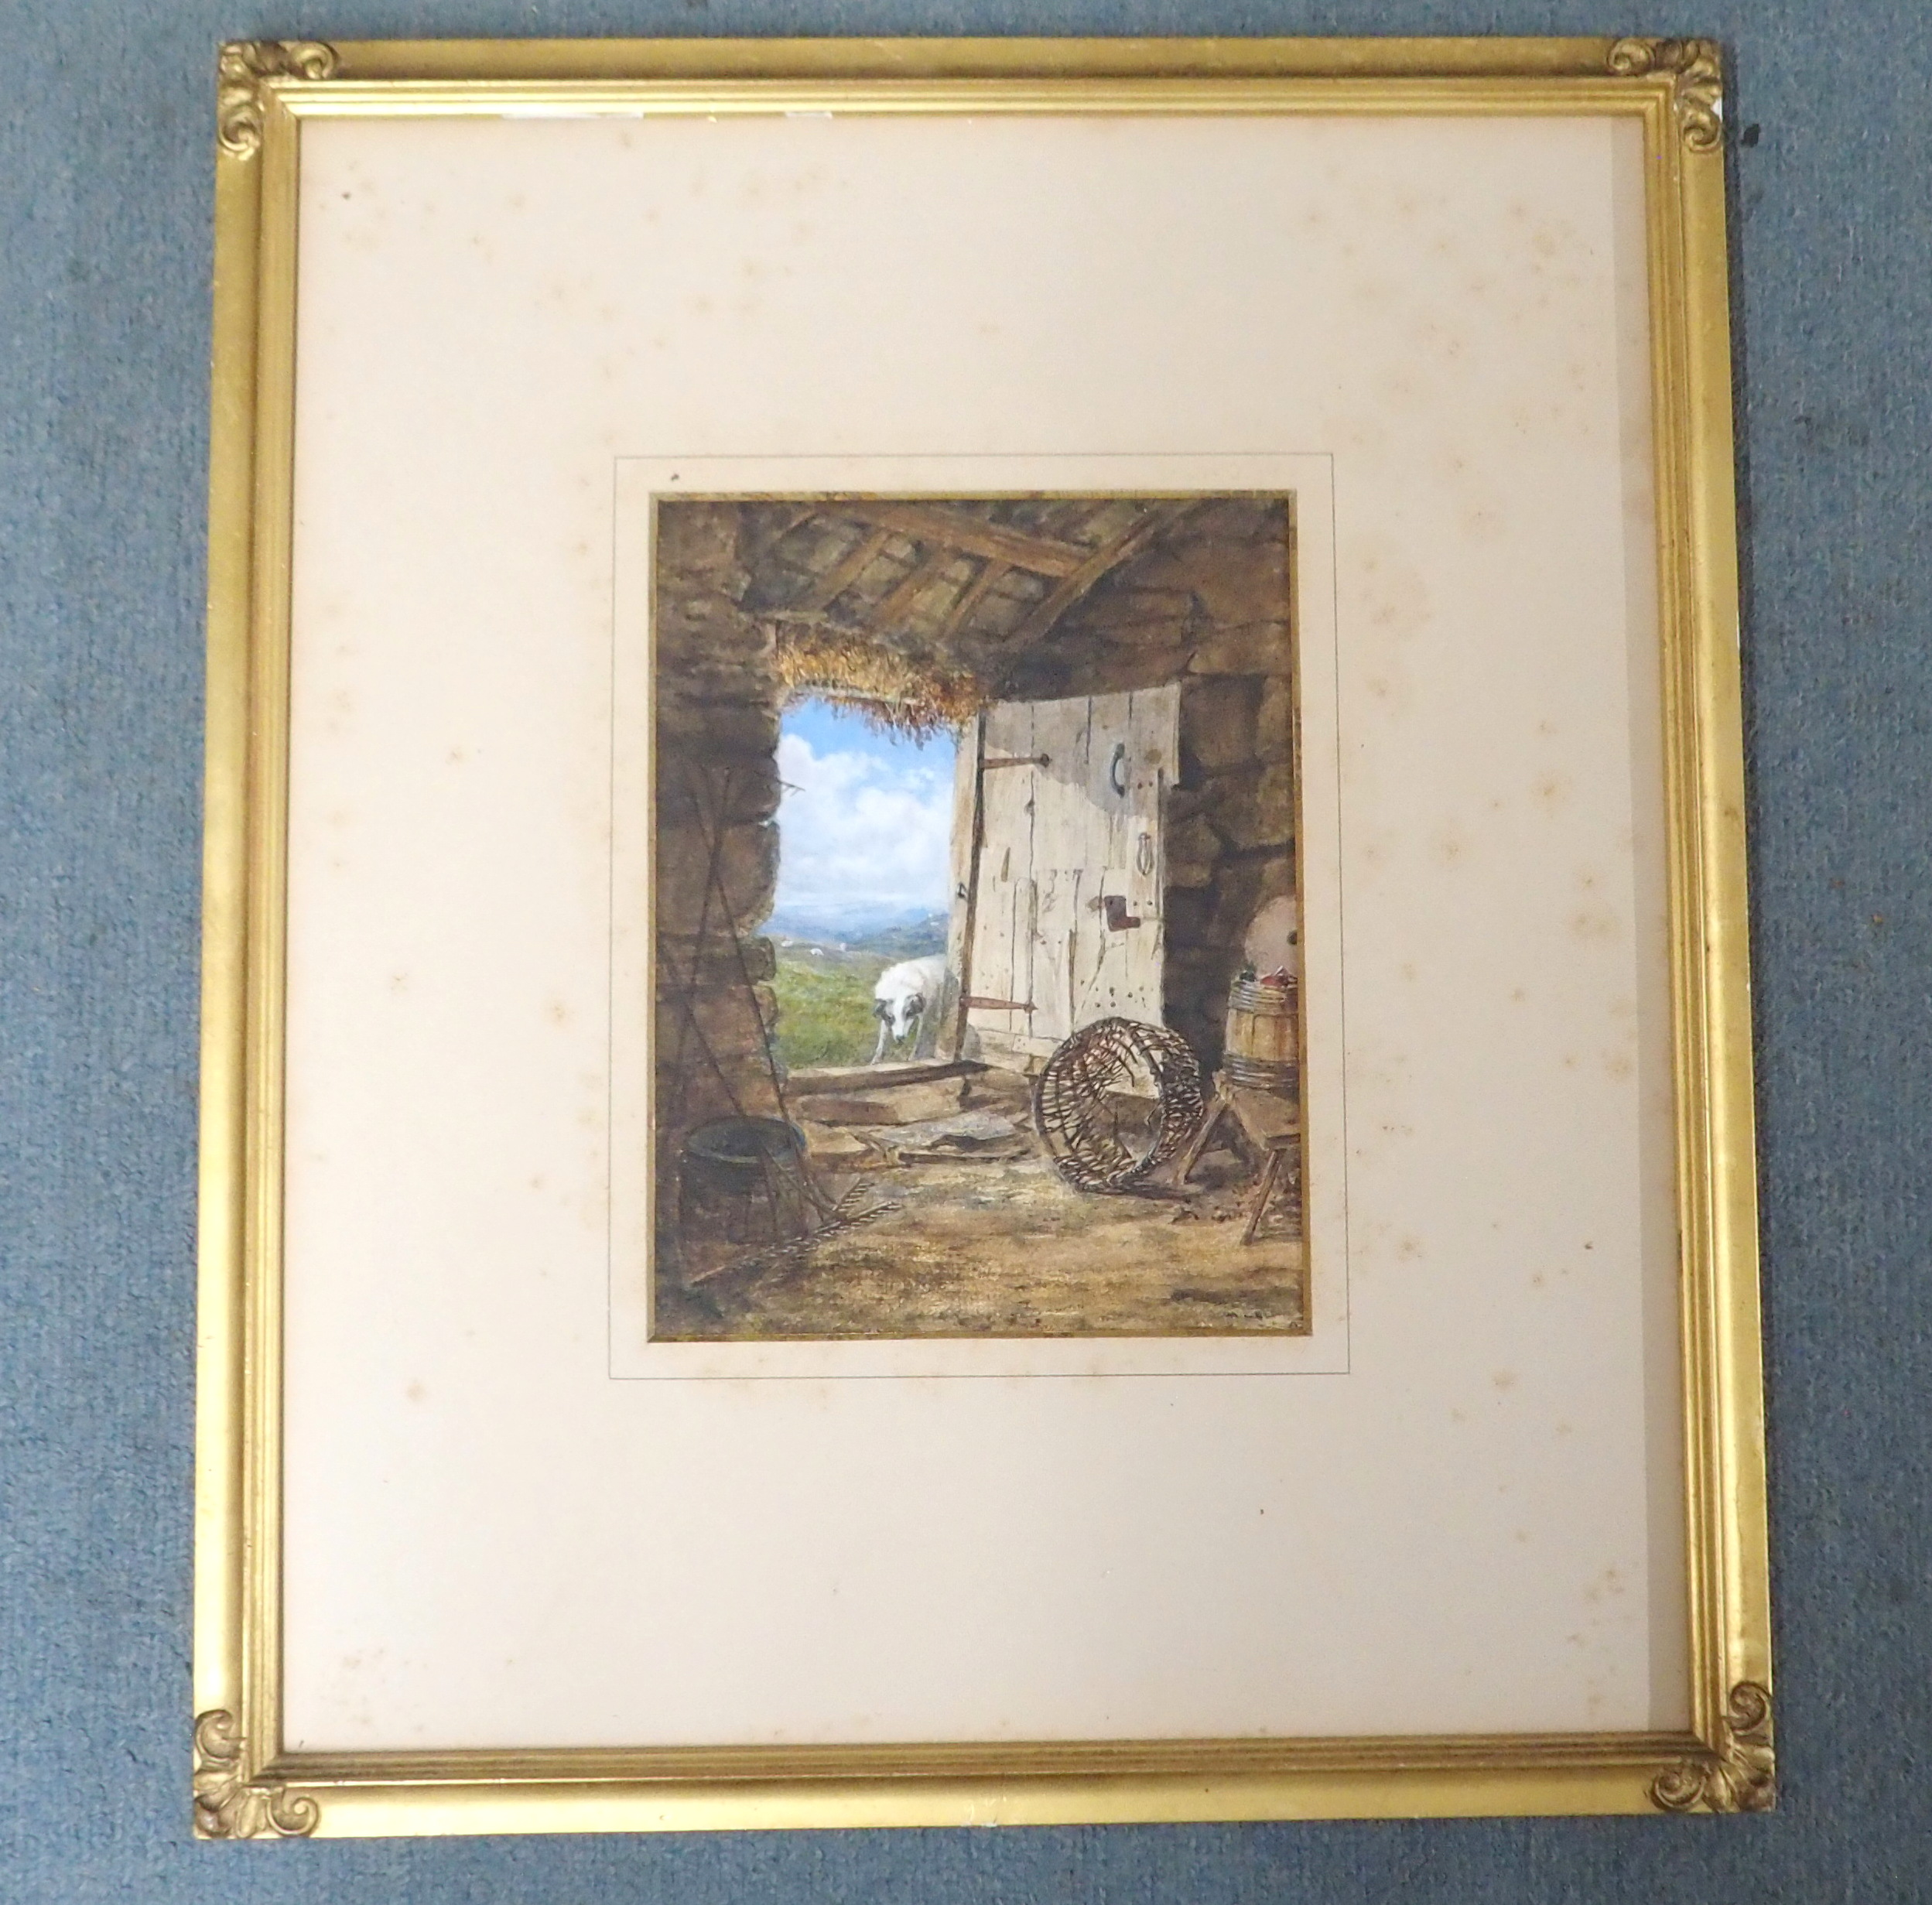 SCOTTISH SCHOOL (19TH CENTURY) THE OPEN DOOR Watercolour heightened with white, 24 x 18cm (9 1/2 x - Image 2 of 4